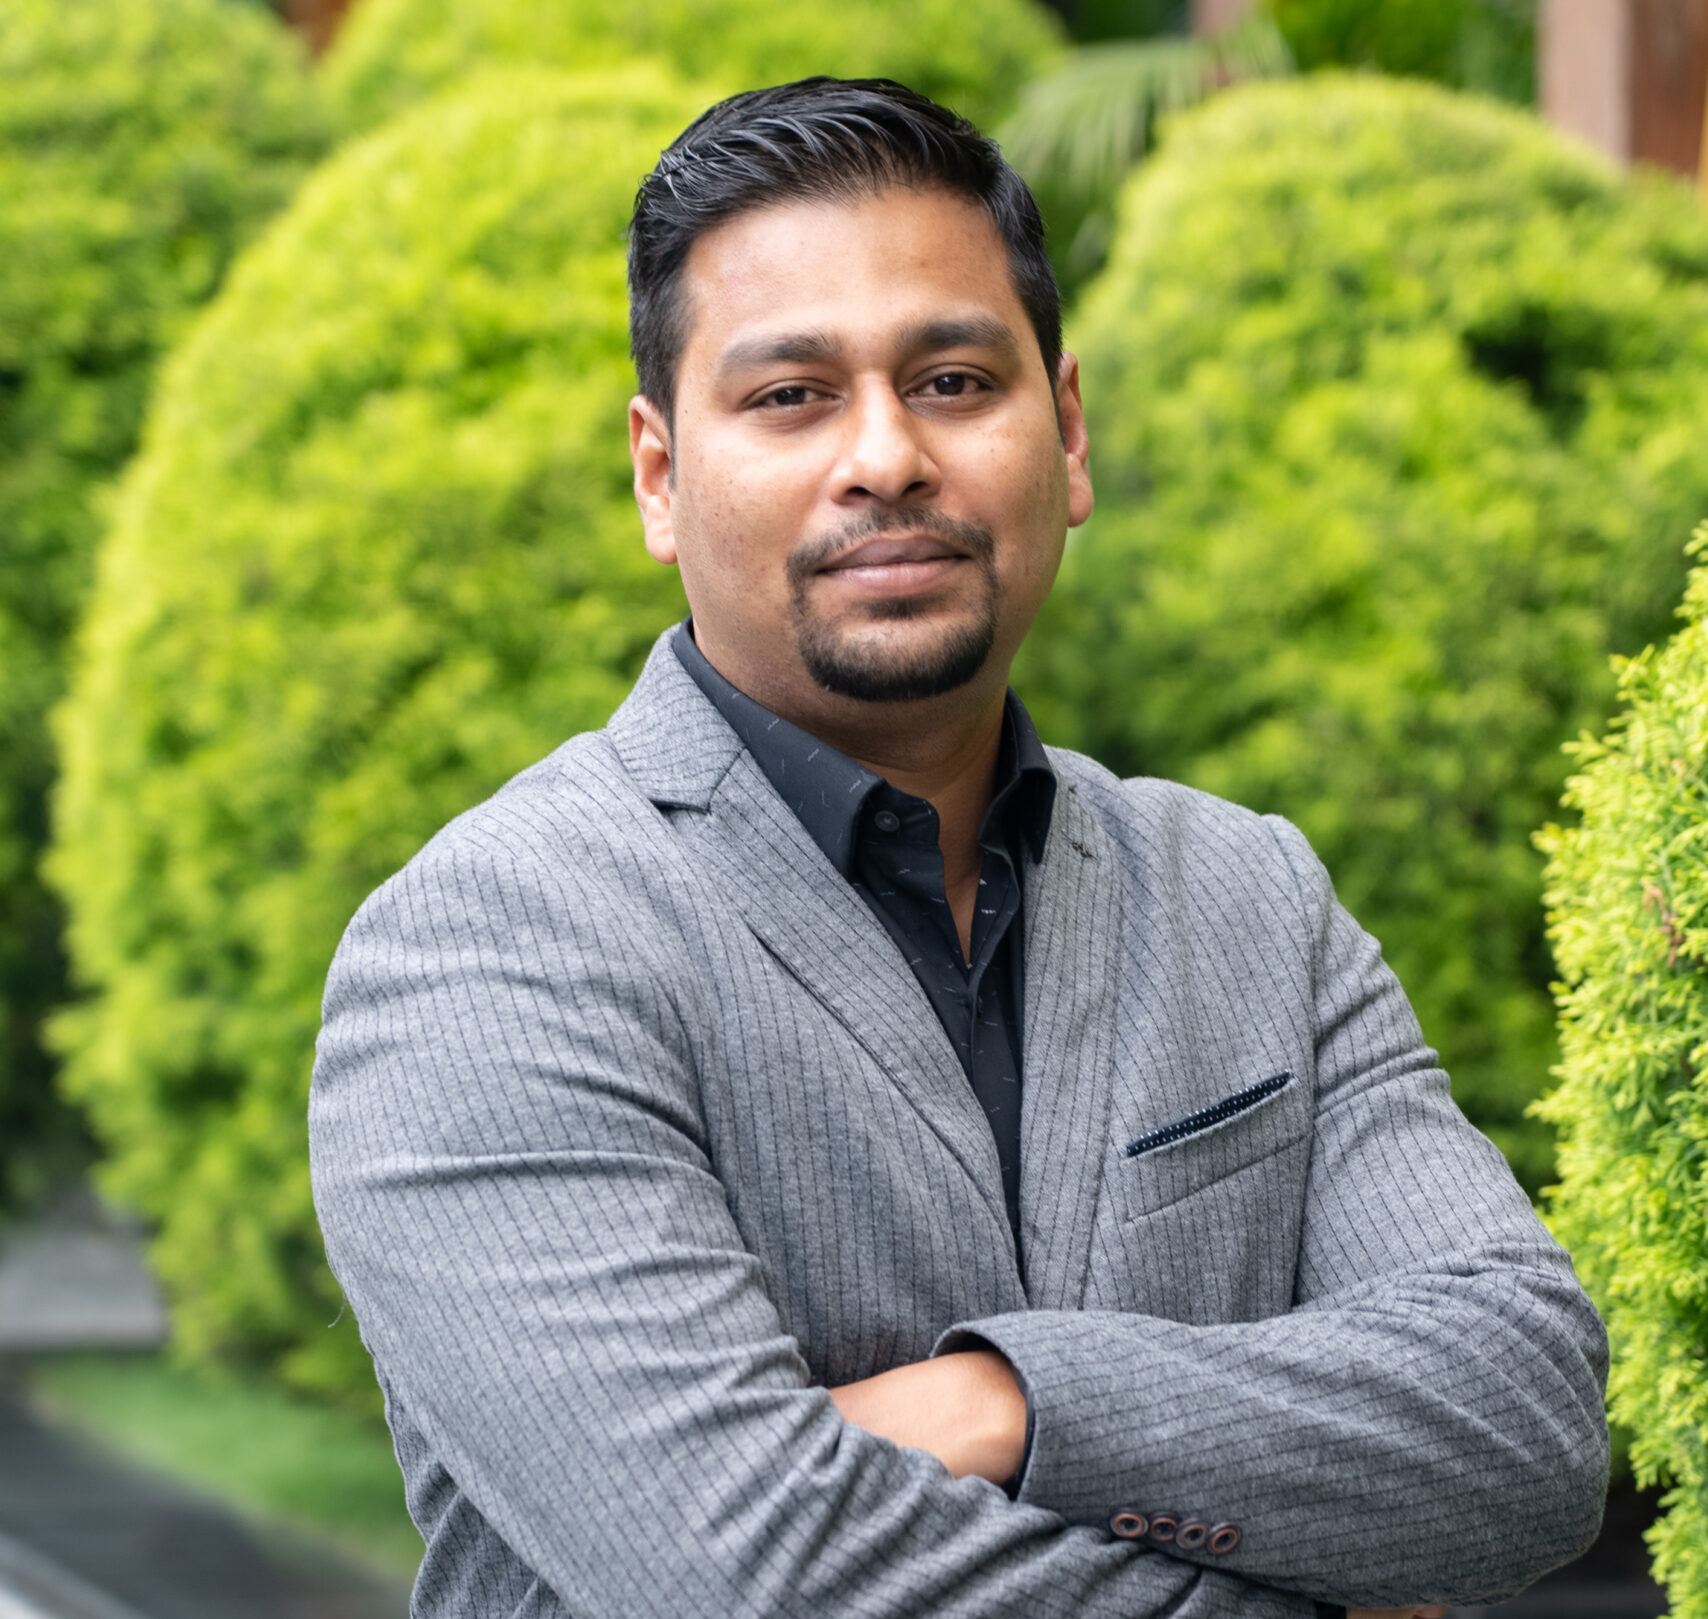 Vinoth Kumar R joins Hyatt Centric MG Road Bangalore as the new Food & Beverage Manager